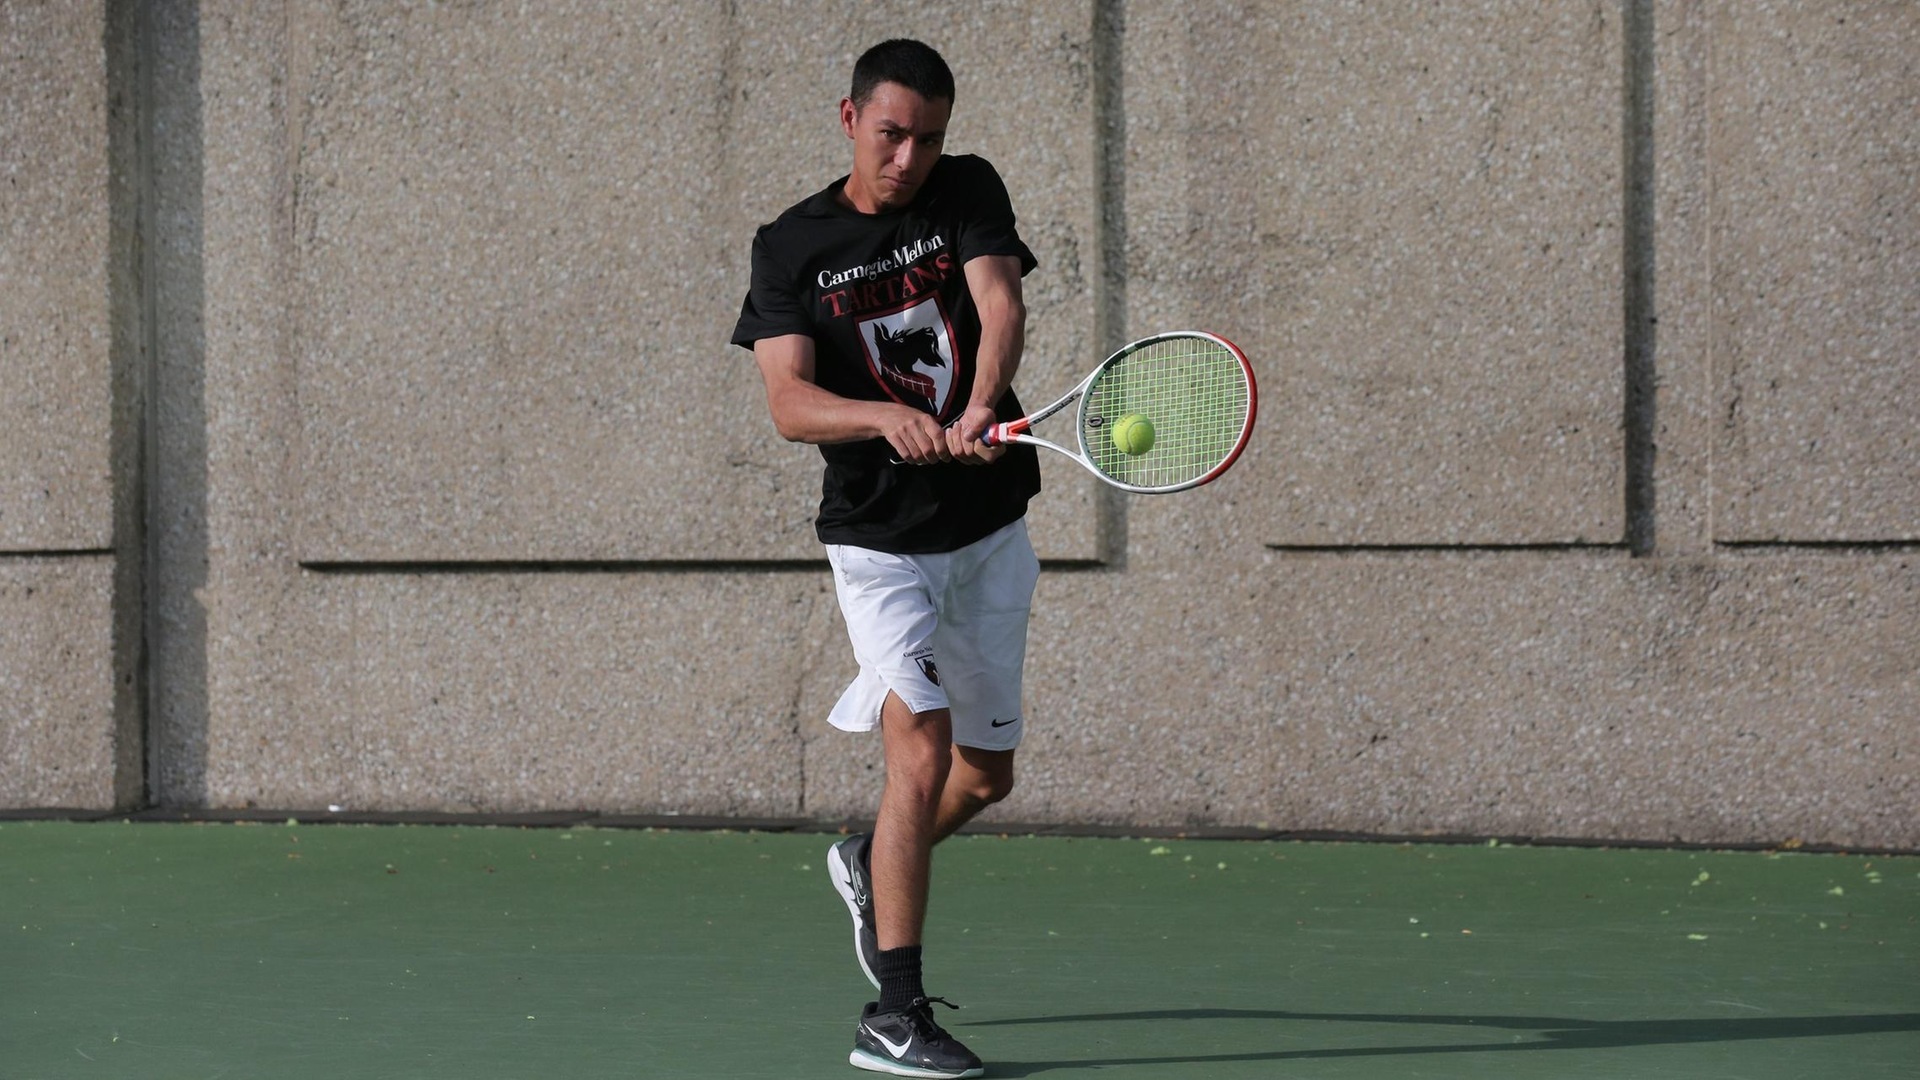 men's tennis player wearing a black shirt and white shorts swinging a racquet with two hands